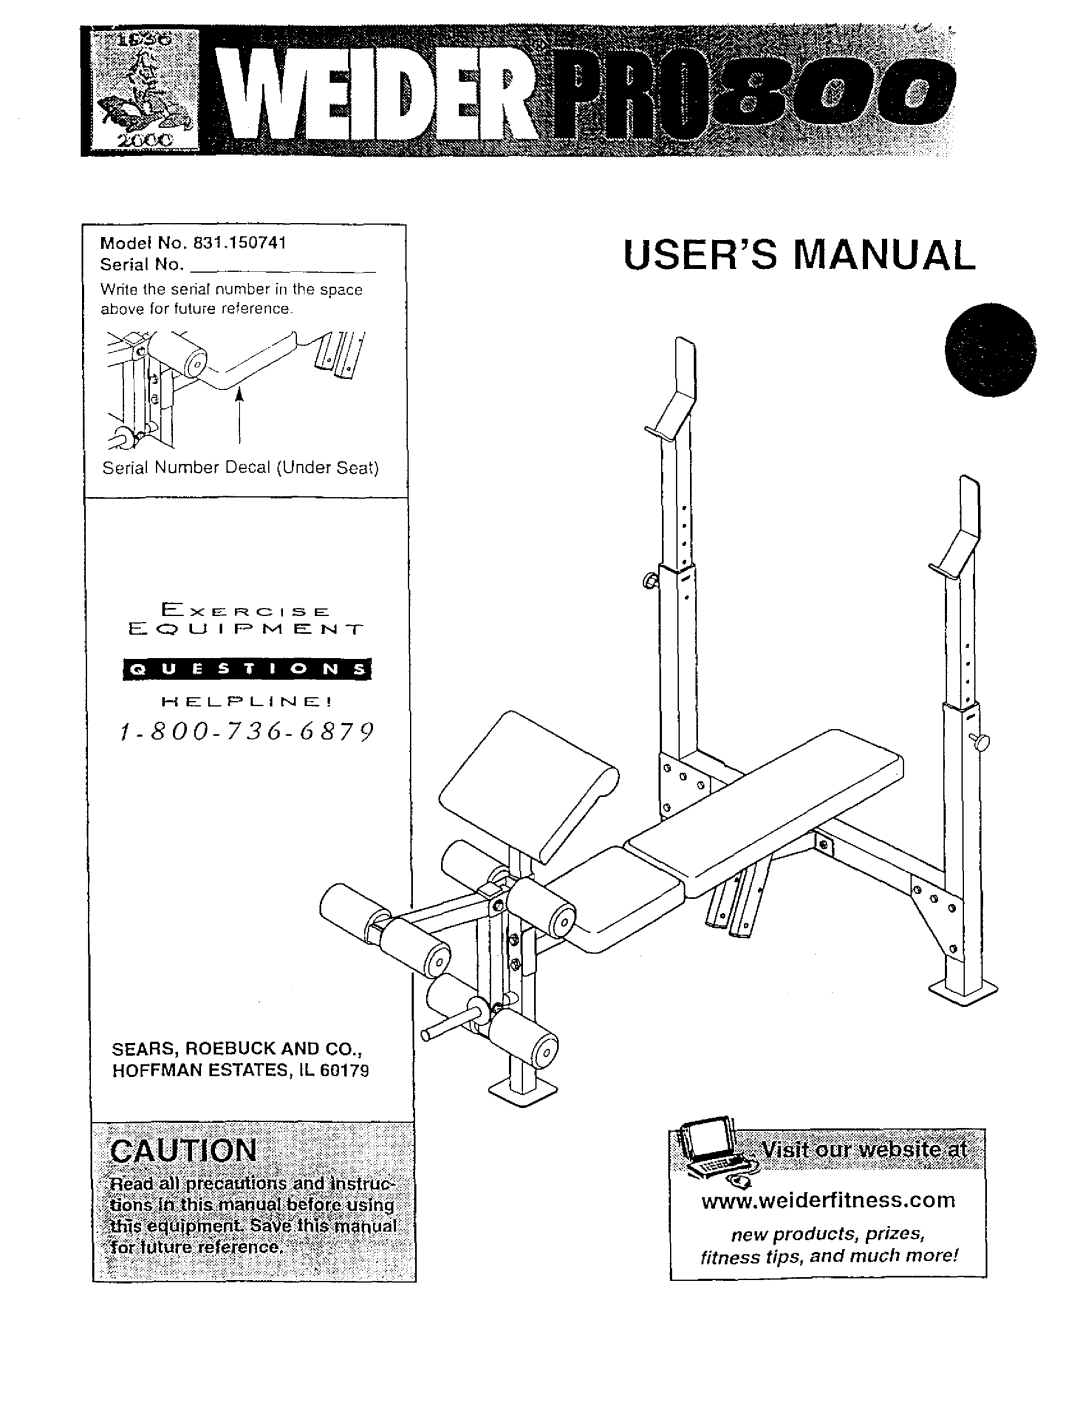 Weider 831,150,741 user manual new products, prizes, fitness tips, and much more, Users Manual, X Ec F C I S E Equipment 